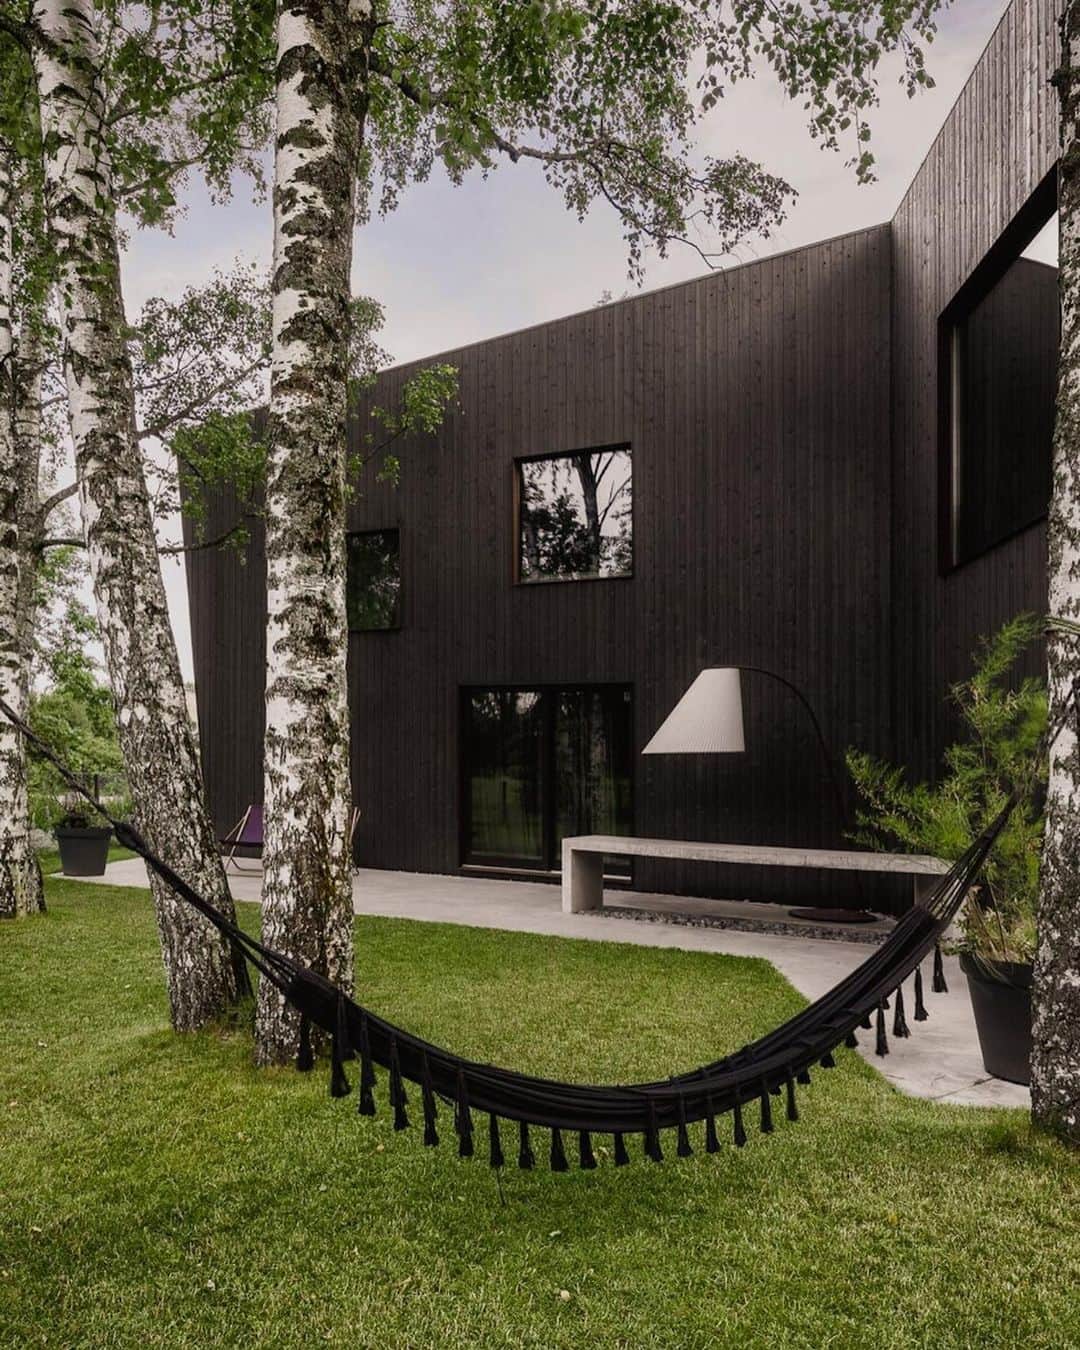 Architecture - Housesさんのインスタグラム写真 - (Architecture - HousesInstagram)「⁣ 𝗔𝗿𝗰𝗵𝗶𝘁𝗲𝗰𝘁𝘀’ 𝗛𝗼𝘂𝘀𝗲 🖤⁣ The structure of this house was built offsite as a prefab. Timber is a versatile, sustainable and resilient building material and it allowed to create the tilting shape of the house.The grey-stained Baltic timber cladding has a silver patina which is complemented by the rusted metal entranceway and window surrounds.⁣ What do you think about this #architecture material? Do you like how it works in this project?⁣ Leave your comment...we read you!🧐⁣ _____⁣⁣⁣⁣⁣⁣⁣⁣⁣⁣⁣⁣⁣⁣⁣⁣⁣⁣⁣⁣⁣⁣⁣⁣⁣⁣⁣⁣⁣⁣⁣⁣⁣⁣⁣ 📐@openad_lv 📍Bierini, Riga, Latvia⁣ #archidesignhome⁣ _____⁣⁣⁣⁣⁣⁣⁣⁣⁣⁣⁣⁣⁣⁣⁣⁣⁣⁣⁣⁣⁣⁣⁣⁣⁣⁣⁣⁣⁣⁣⁣⁣⁣⁣⁣ #architect #arquitectura #luxury #architettura #interiordesign #archilovers #home #house ‎#amazing #architecturephotography #amazingarchitecture⁣⁣ #realestate #photooftheday #construction #archilovers #home #house ‎#amazing #picoftheday #archigram #ModernArchitect #building」1月18日 1時41分 - _archidesignhome_